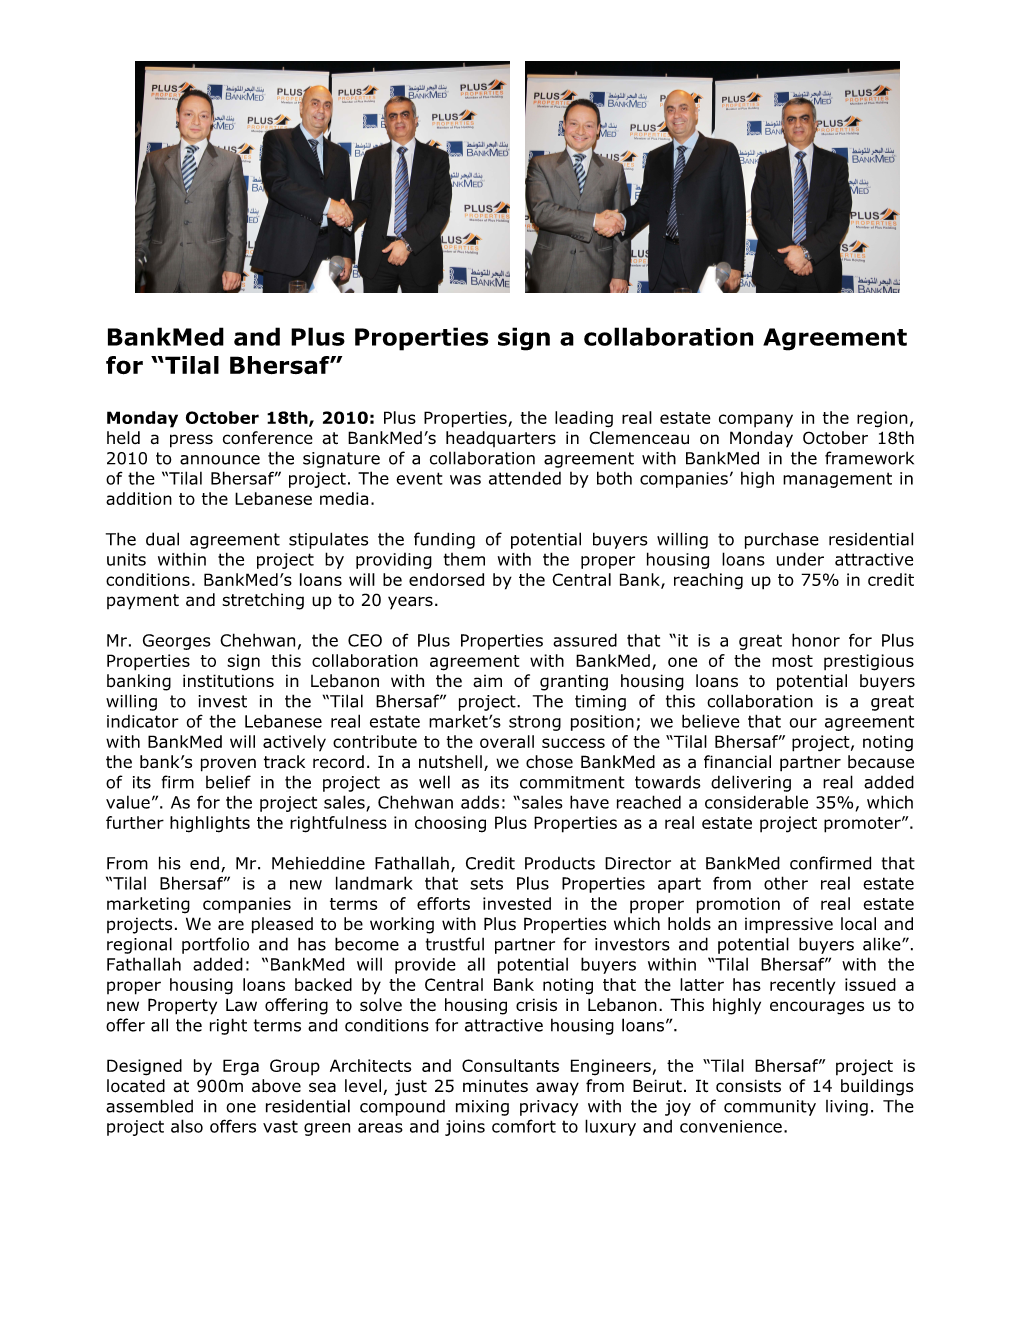 Bankmed and Plus Properties Sign a Collaboration Agreement for Tilal Bhersaf